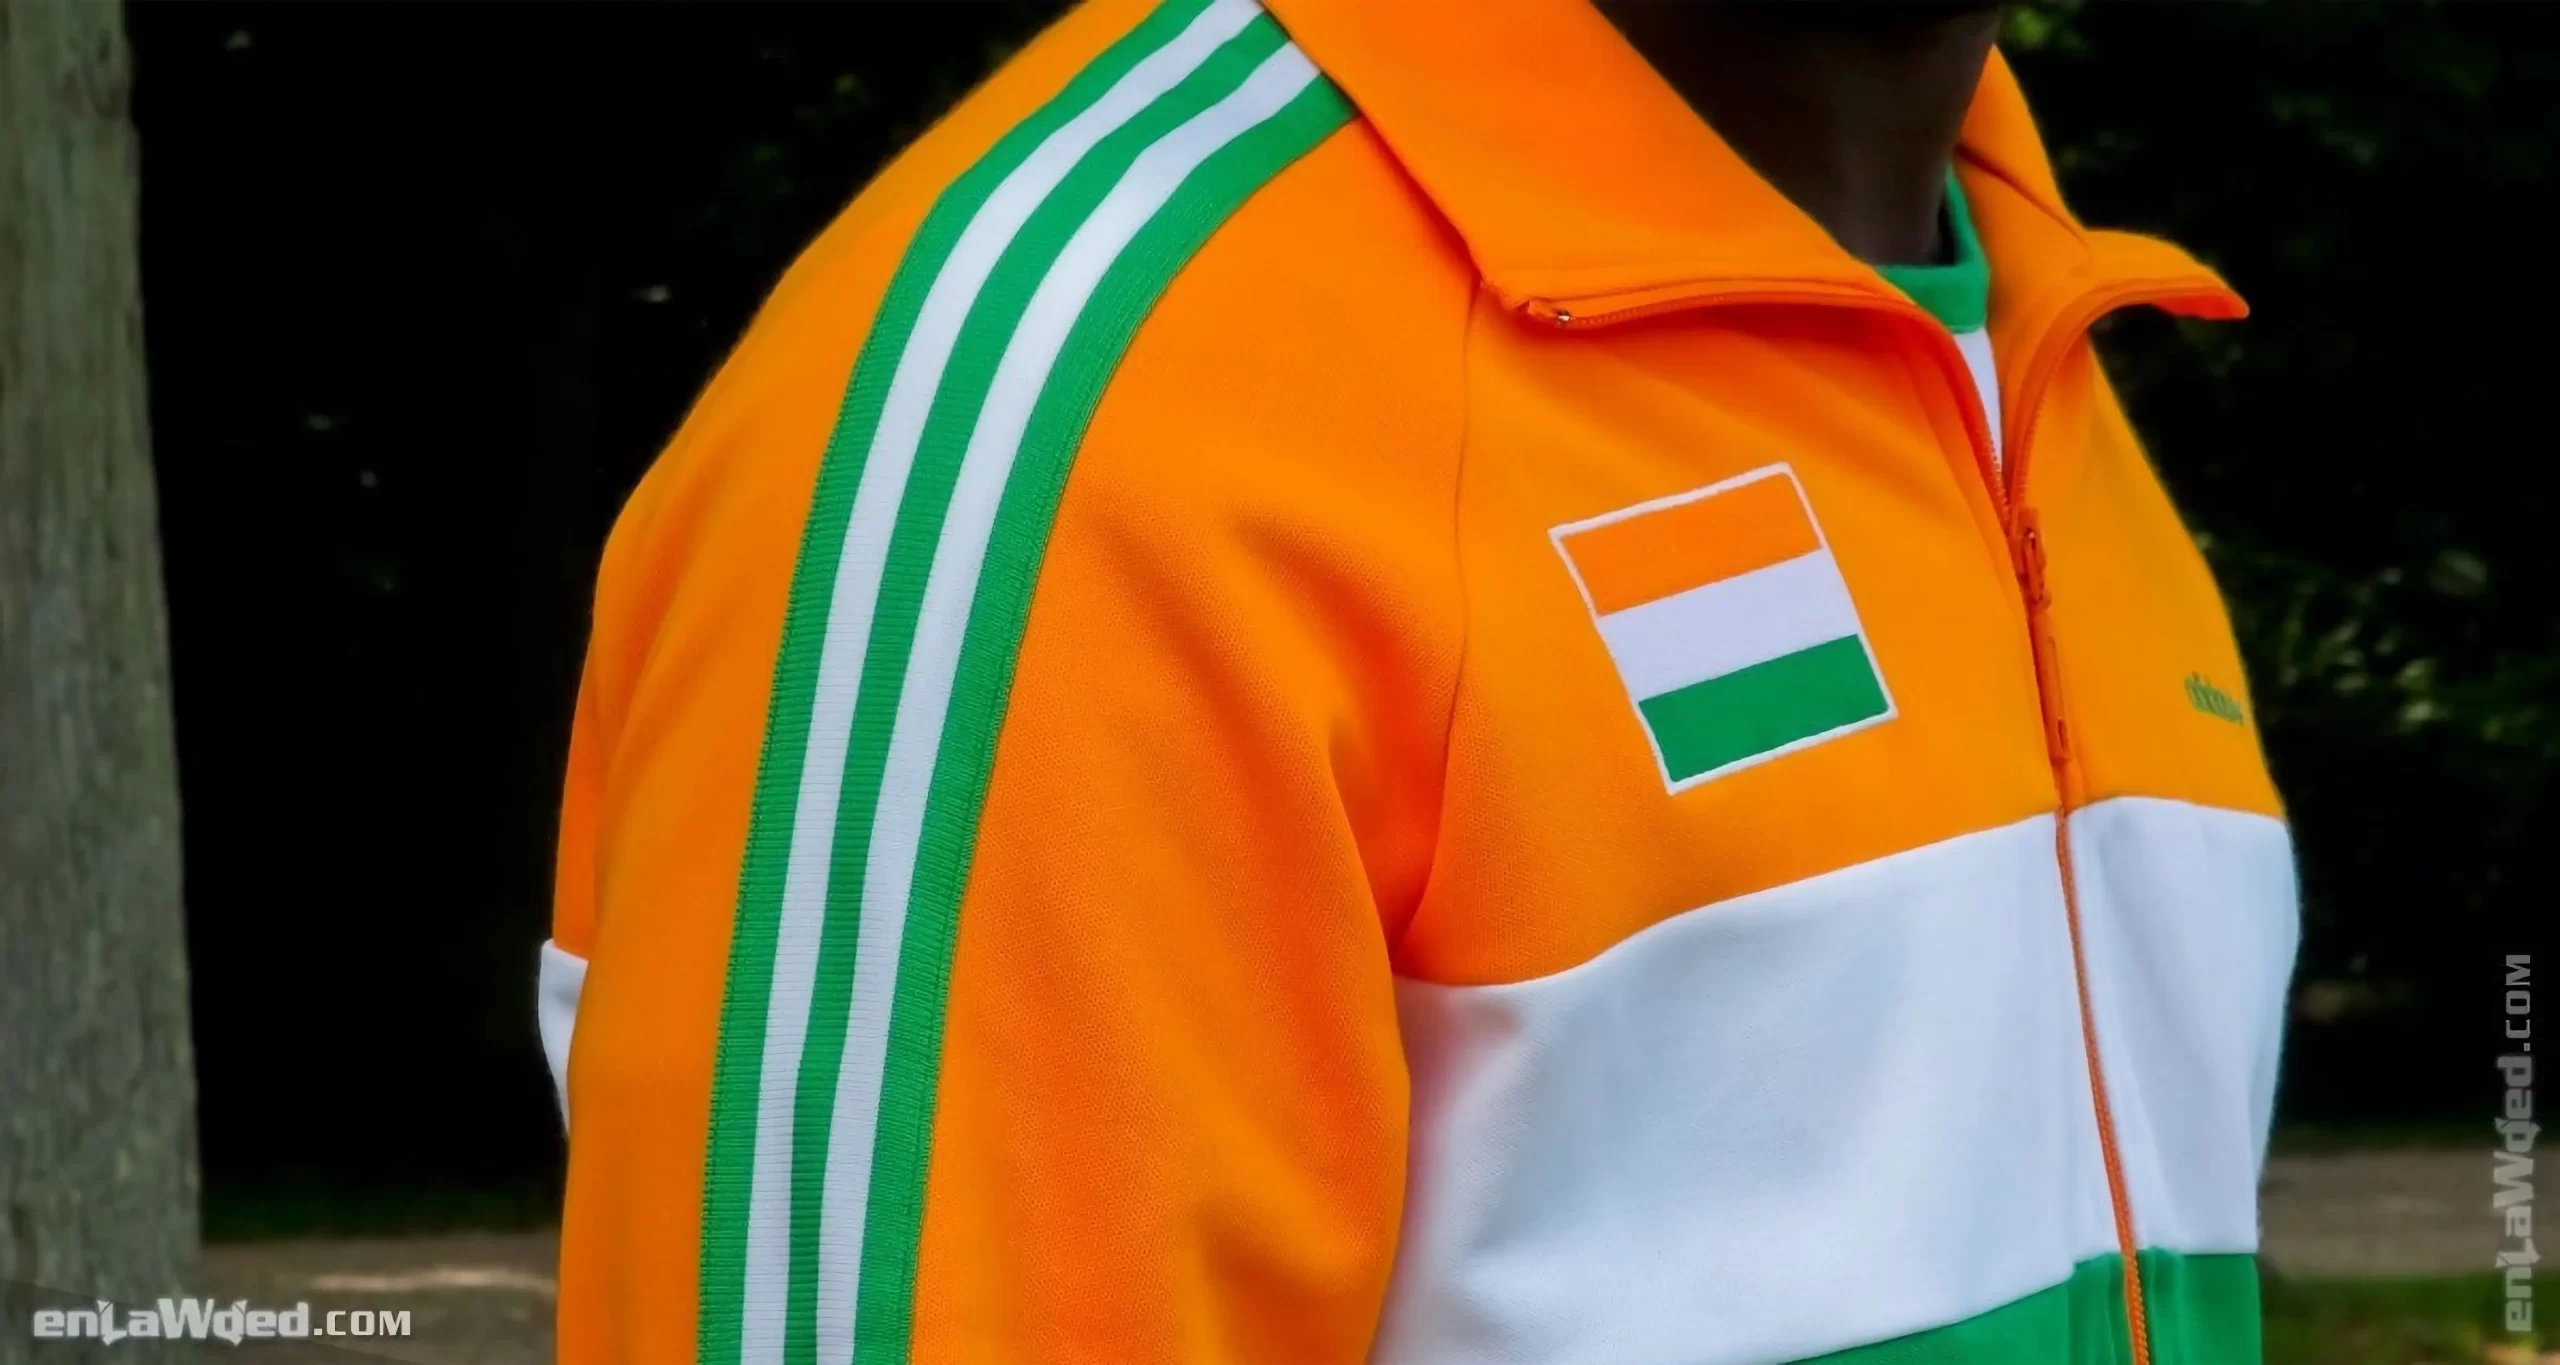 Men’s 2005 India Track Top by Adidas Originals: Jovial (EnLawded.com file #lmcfurrlwapxwz03cl)